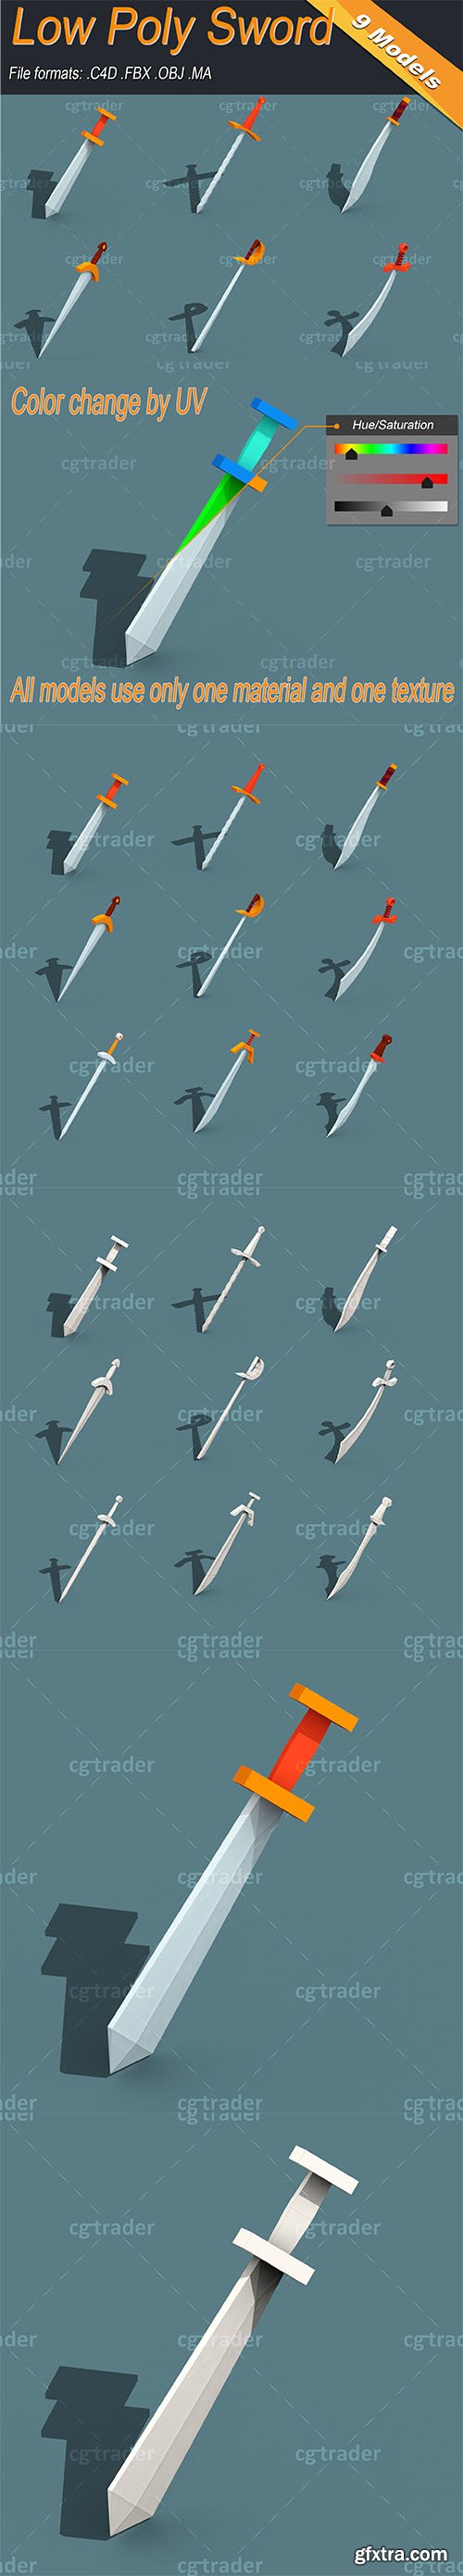 Cgtrader - Low Poly Sword Low-poly 3D model